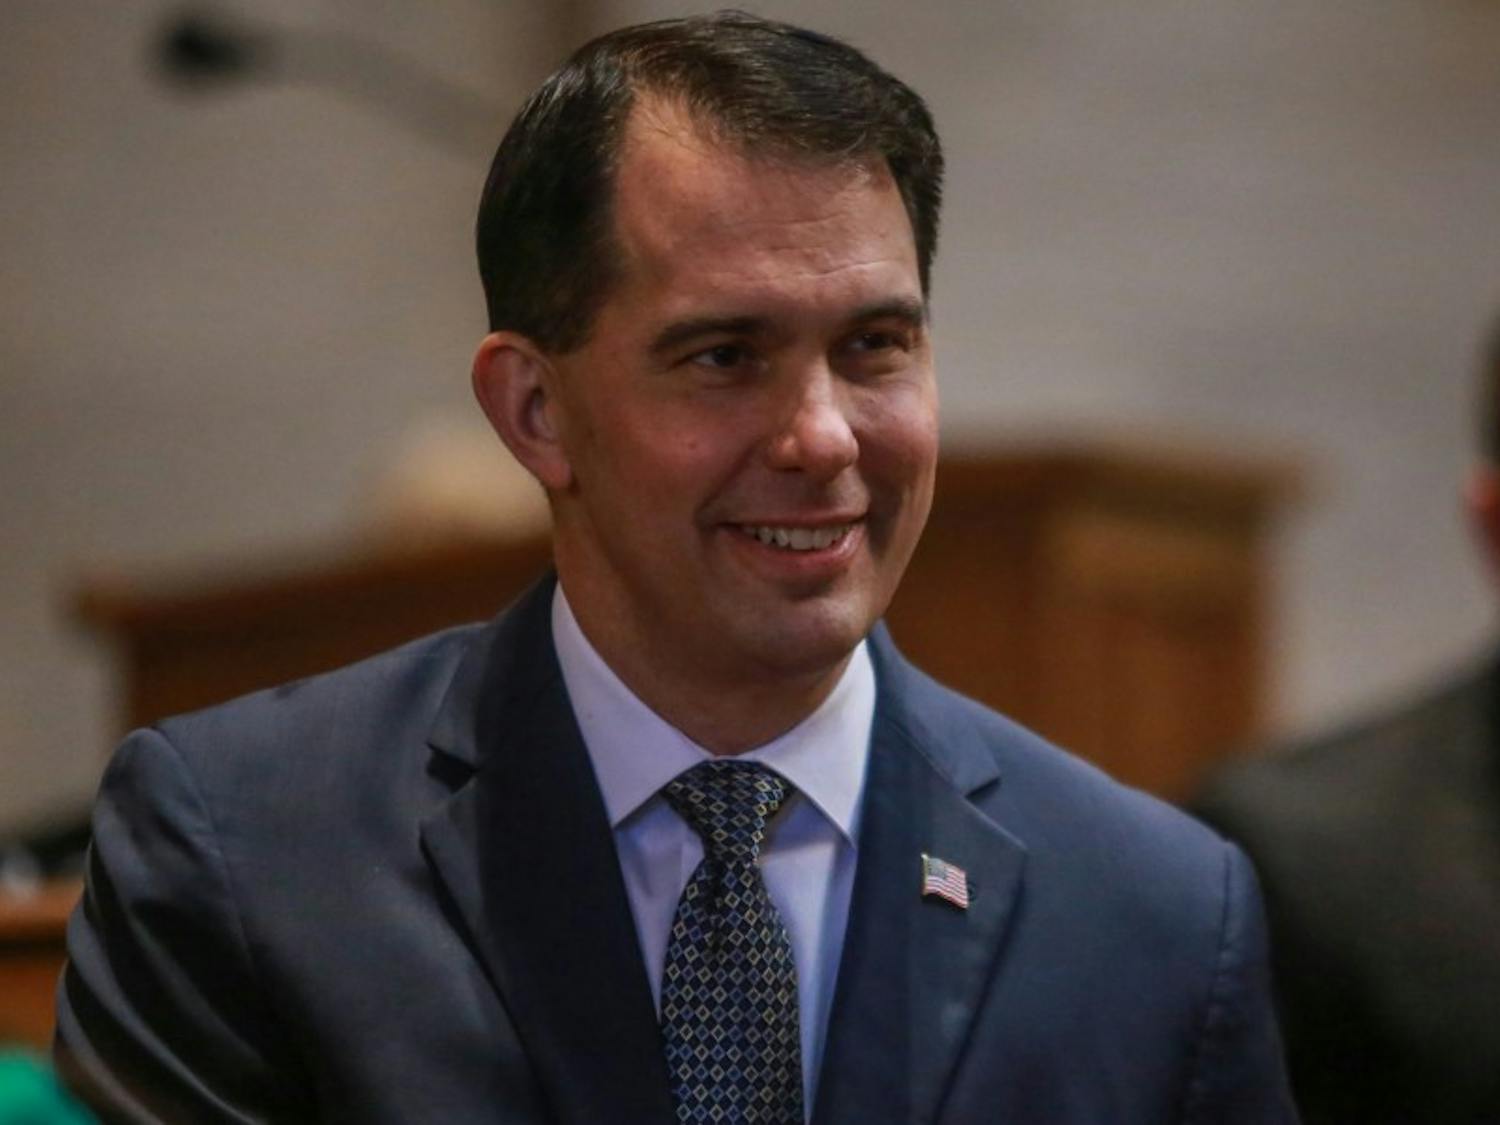 Gov. Scott Walker is the head of the Republican Governors Association, which has a website that looks and acts like a news outlet, but is actually paid for by the association to promote GOP ideals.